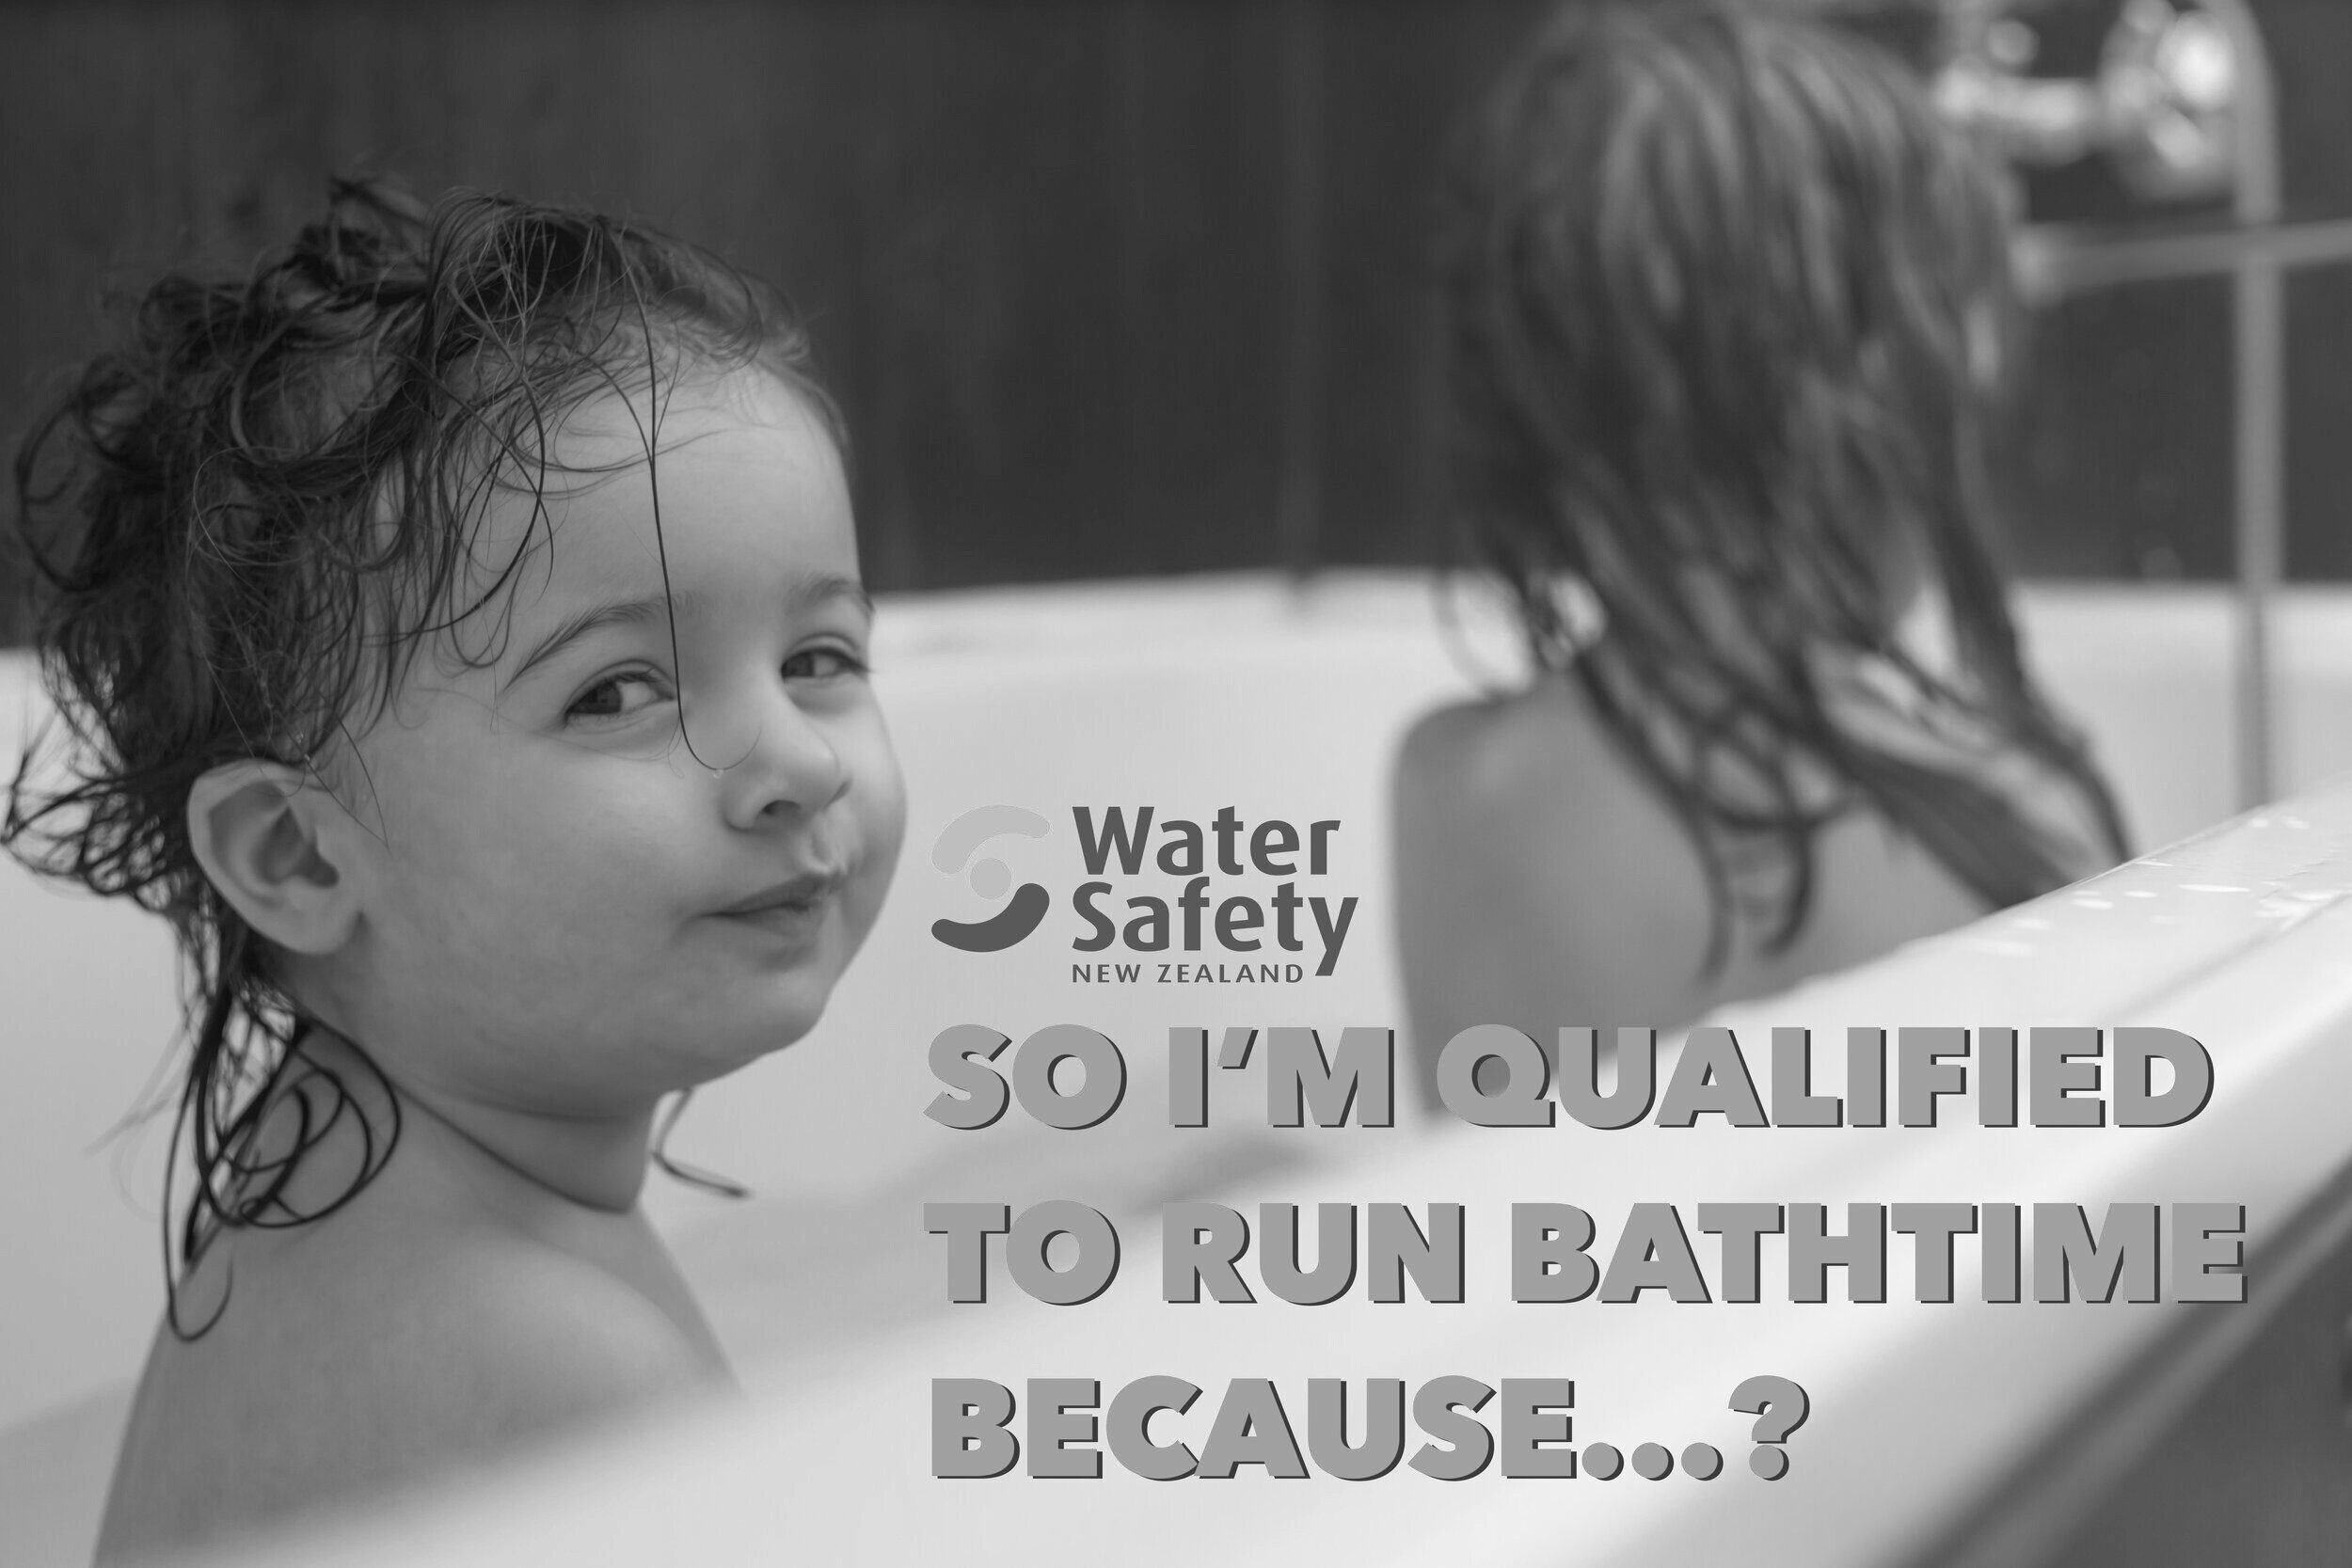 Water Safety NZ - Promoting safer practices for under 5’s